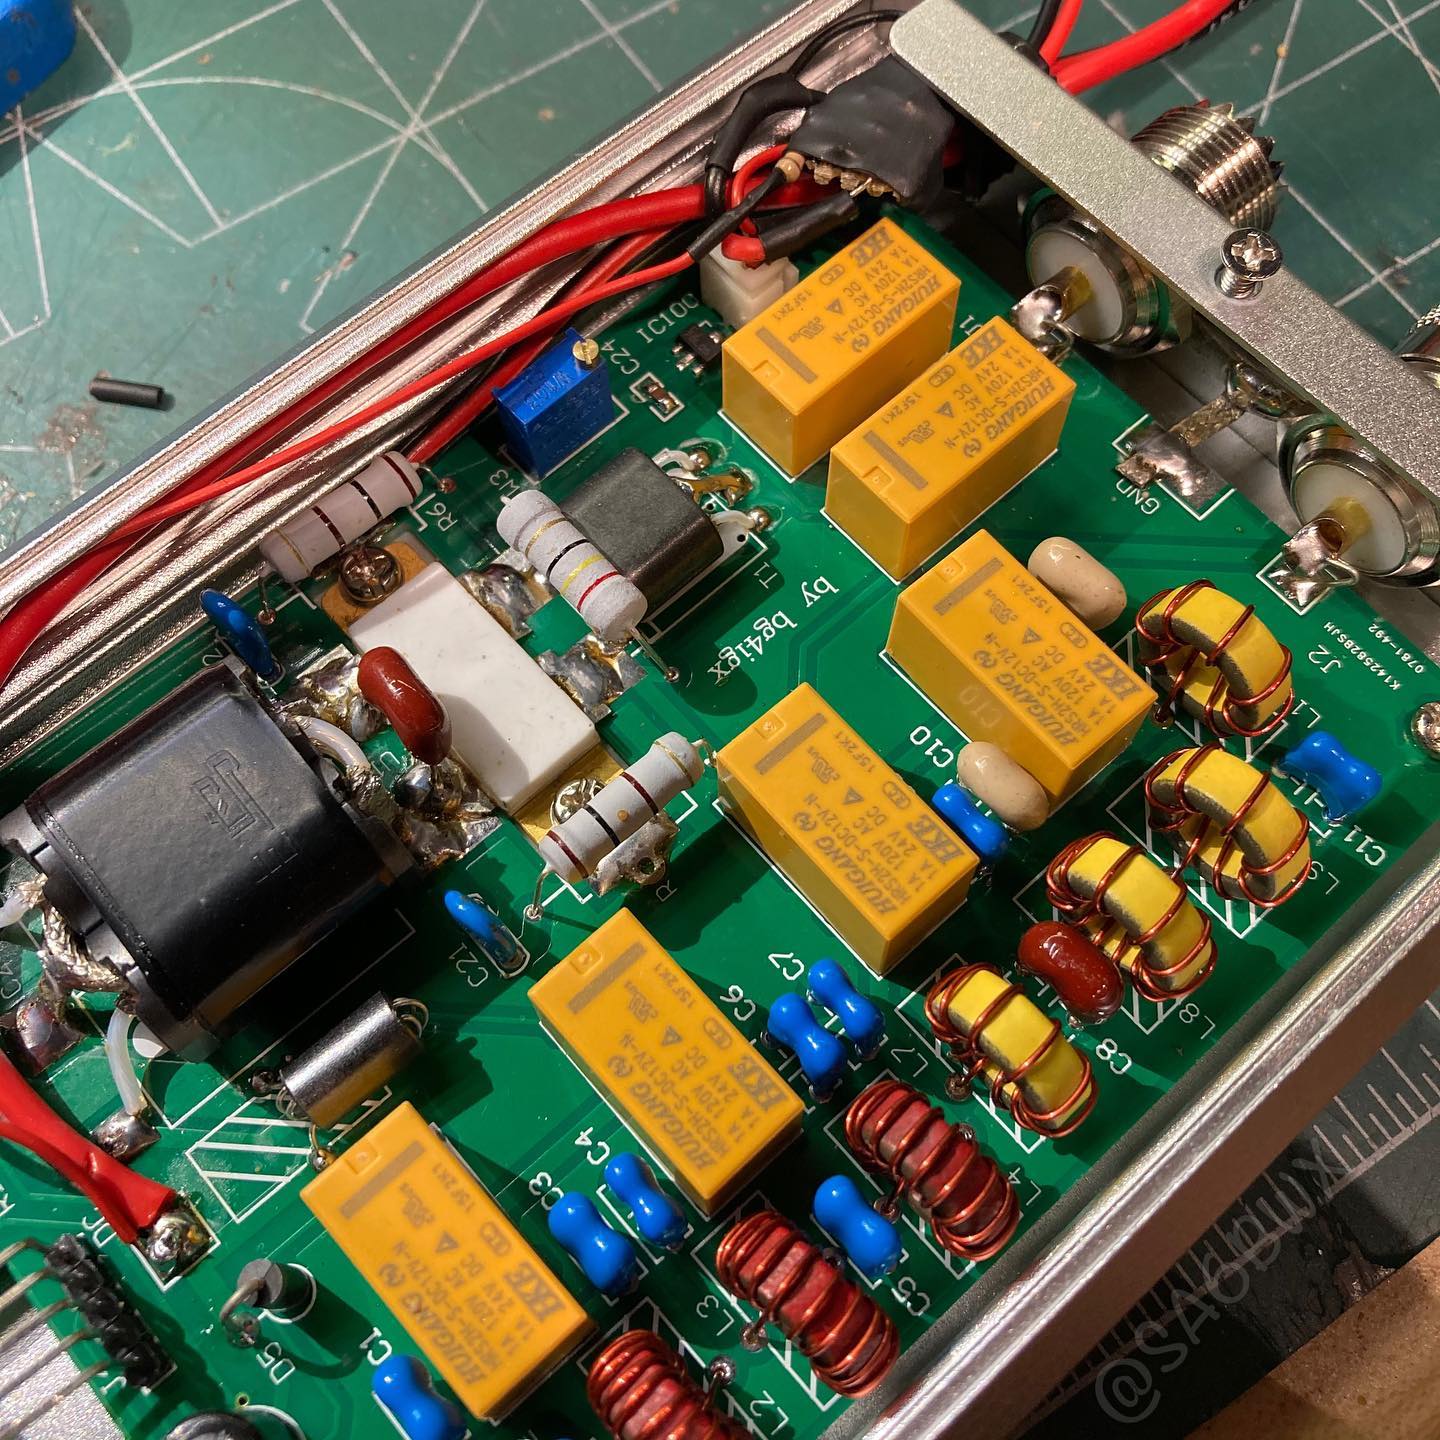 Thanks to Kevin @kb9rlw the MxP50m Amp is now working with Rs-918. A transistor, diode and a resistor was added on a protoboard. Now the radio only need to sink 1mA instead of 40mA! Check out Kevins Youtube channel for the instructions. #mchf #rs918 #mxp50m #sa6bwx #qrp #electronics #hamradio #hamradiouk #amateurradio #kb9rlw